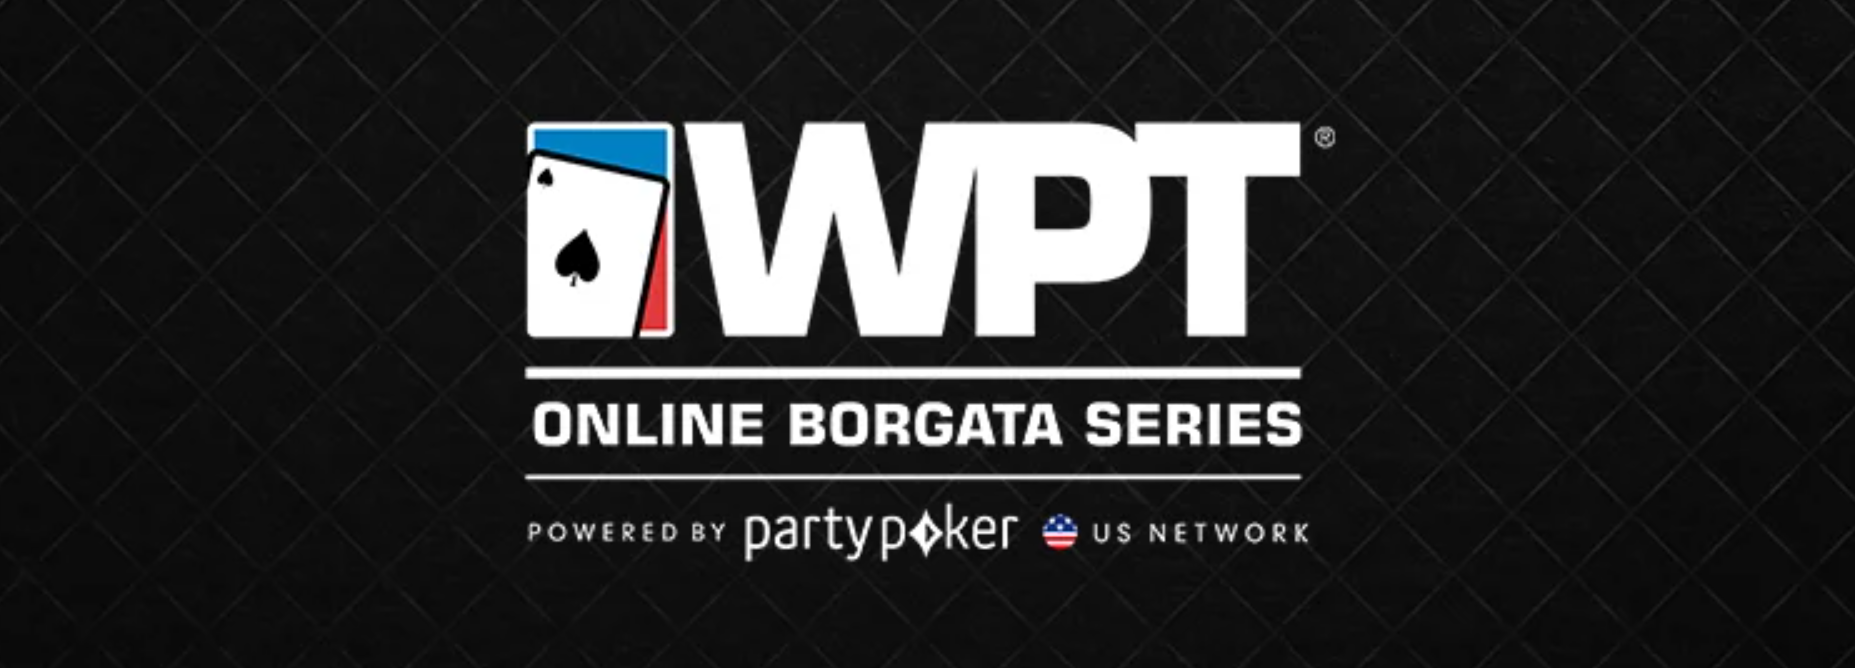 Party Poker Offers